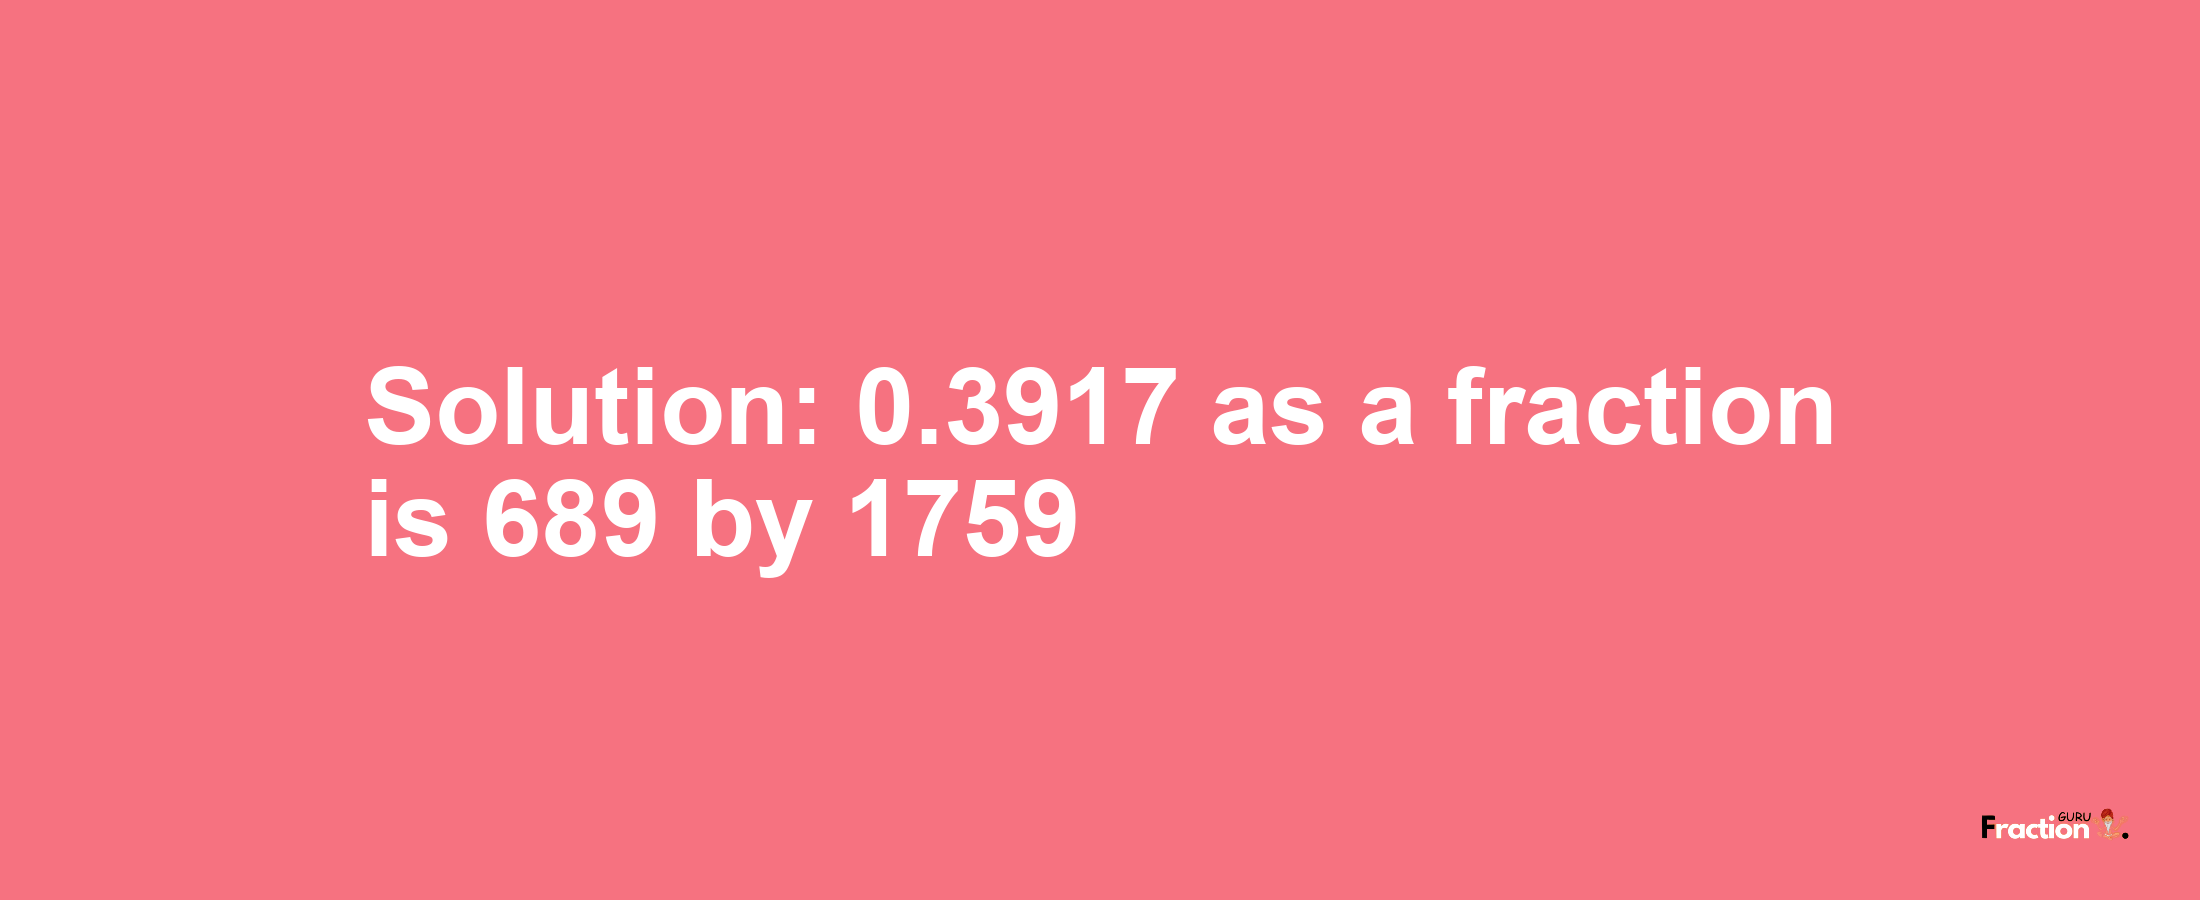 Solution:0.3917 as a fraction is 689/1759